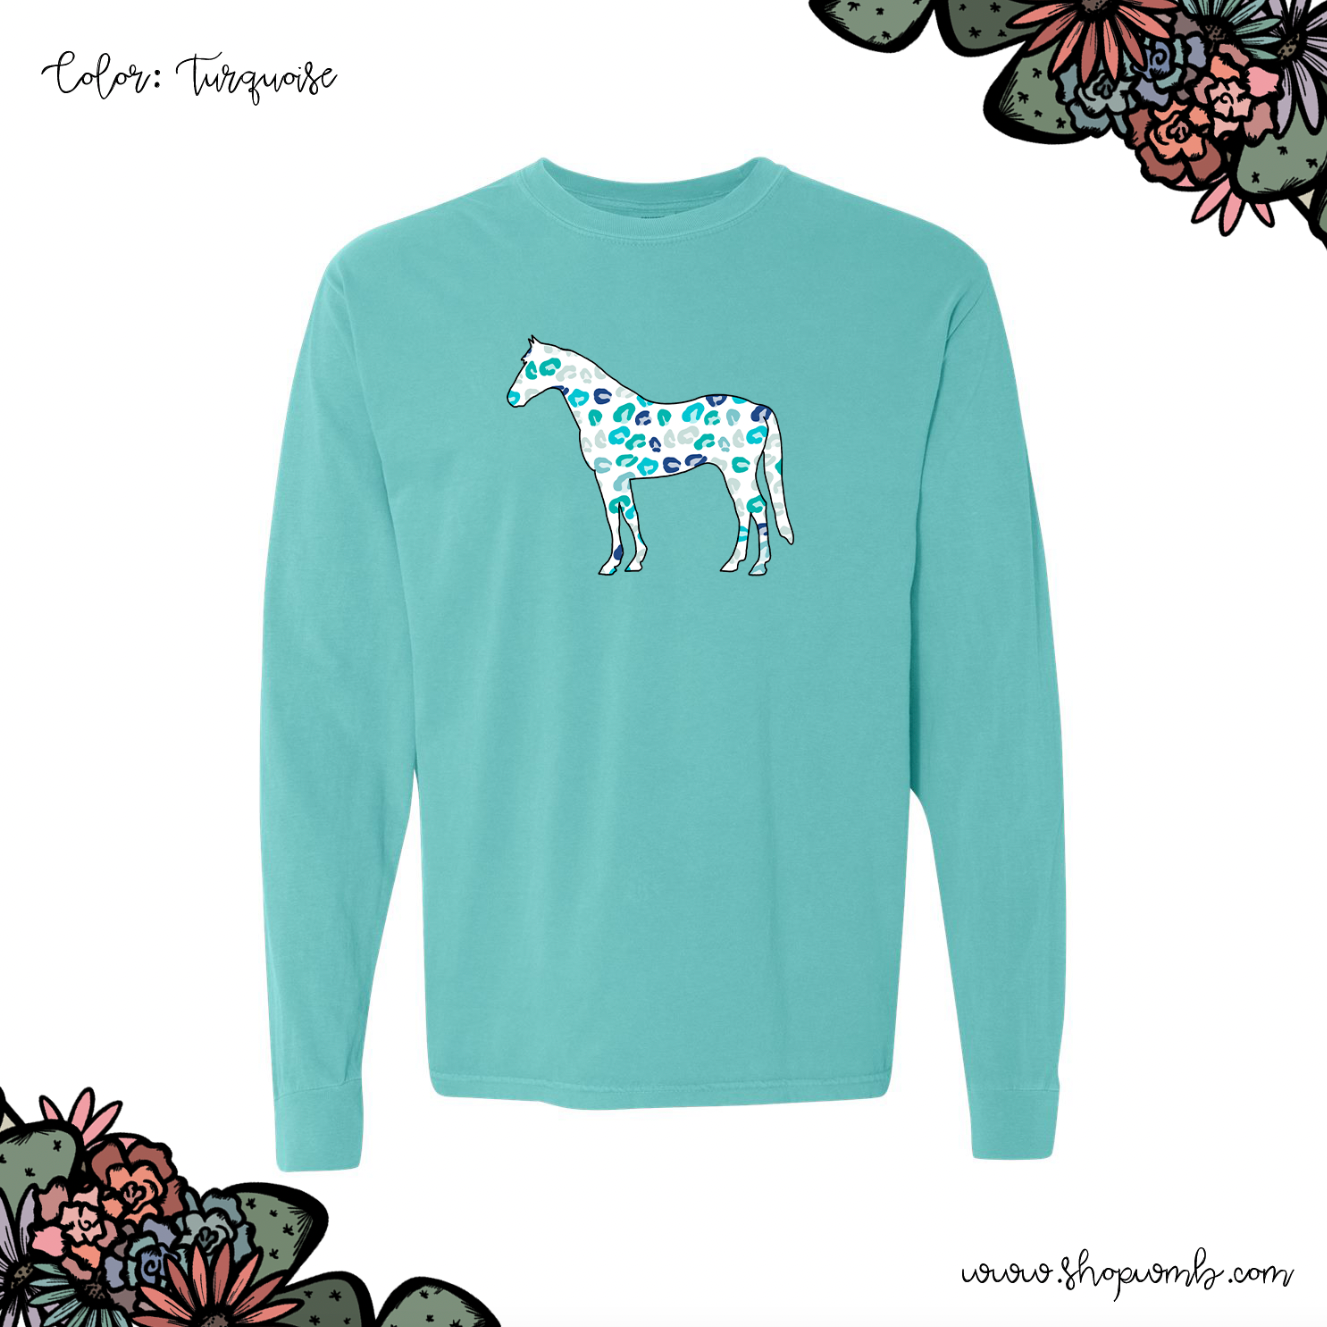 Turquoise Cheetah Horse LONG SLEEVE T-Shirt (S-3XL) - Multiple Colors!